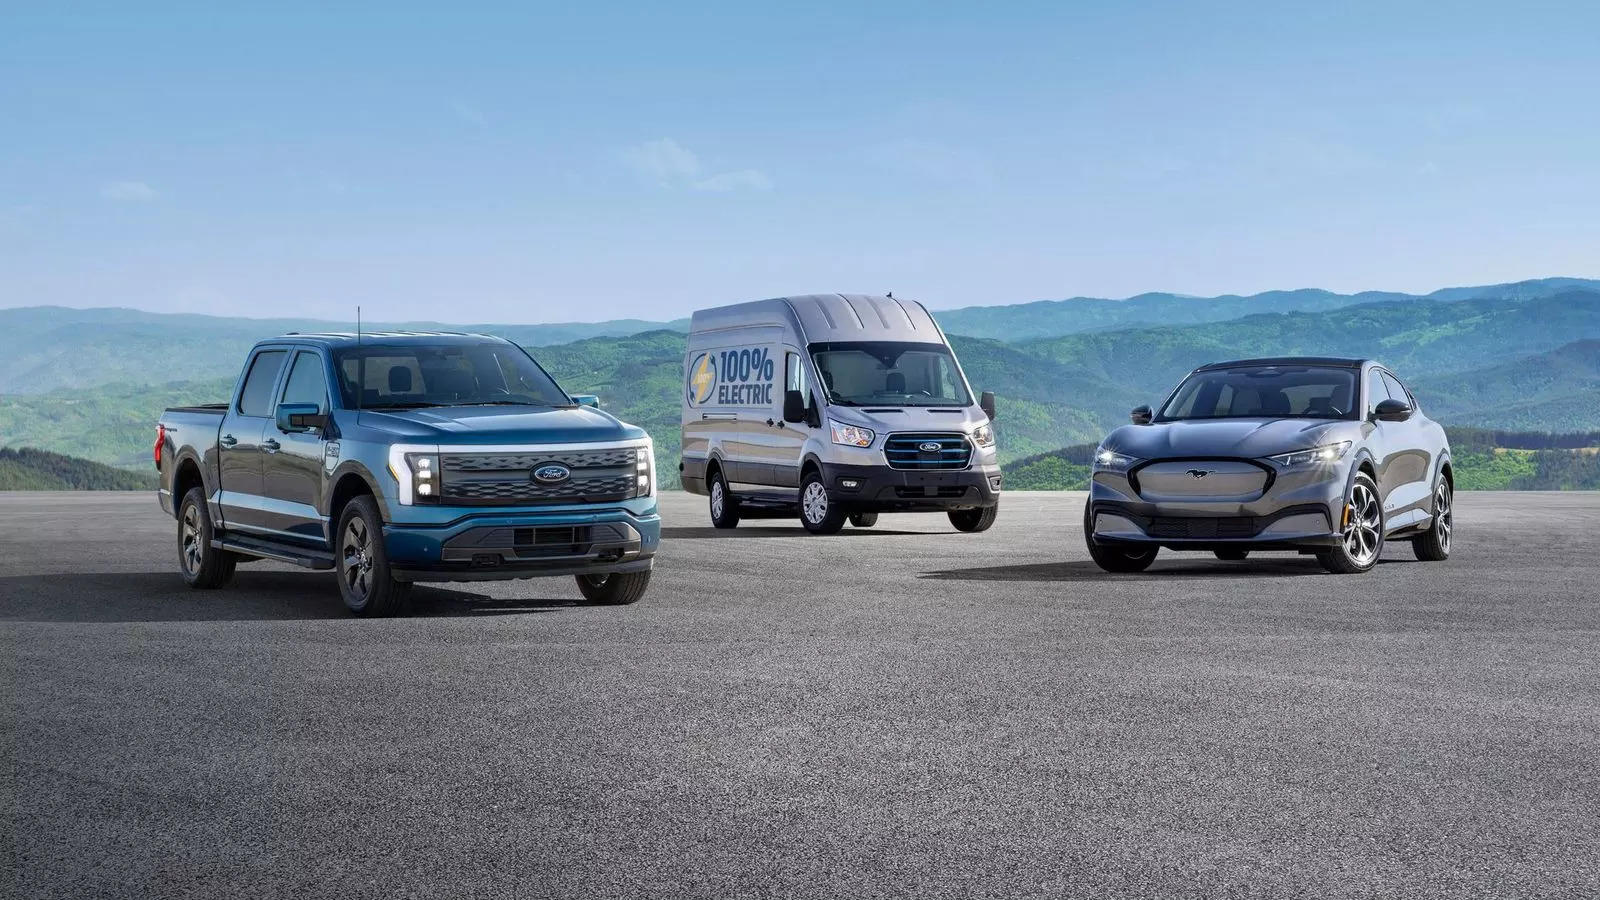  Ford's electrified vehicles segment grew 36% faster than the segment overall in 2021.